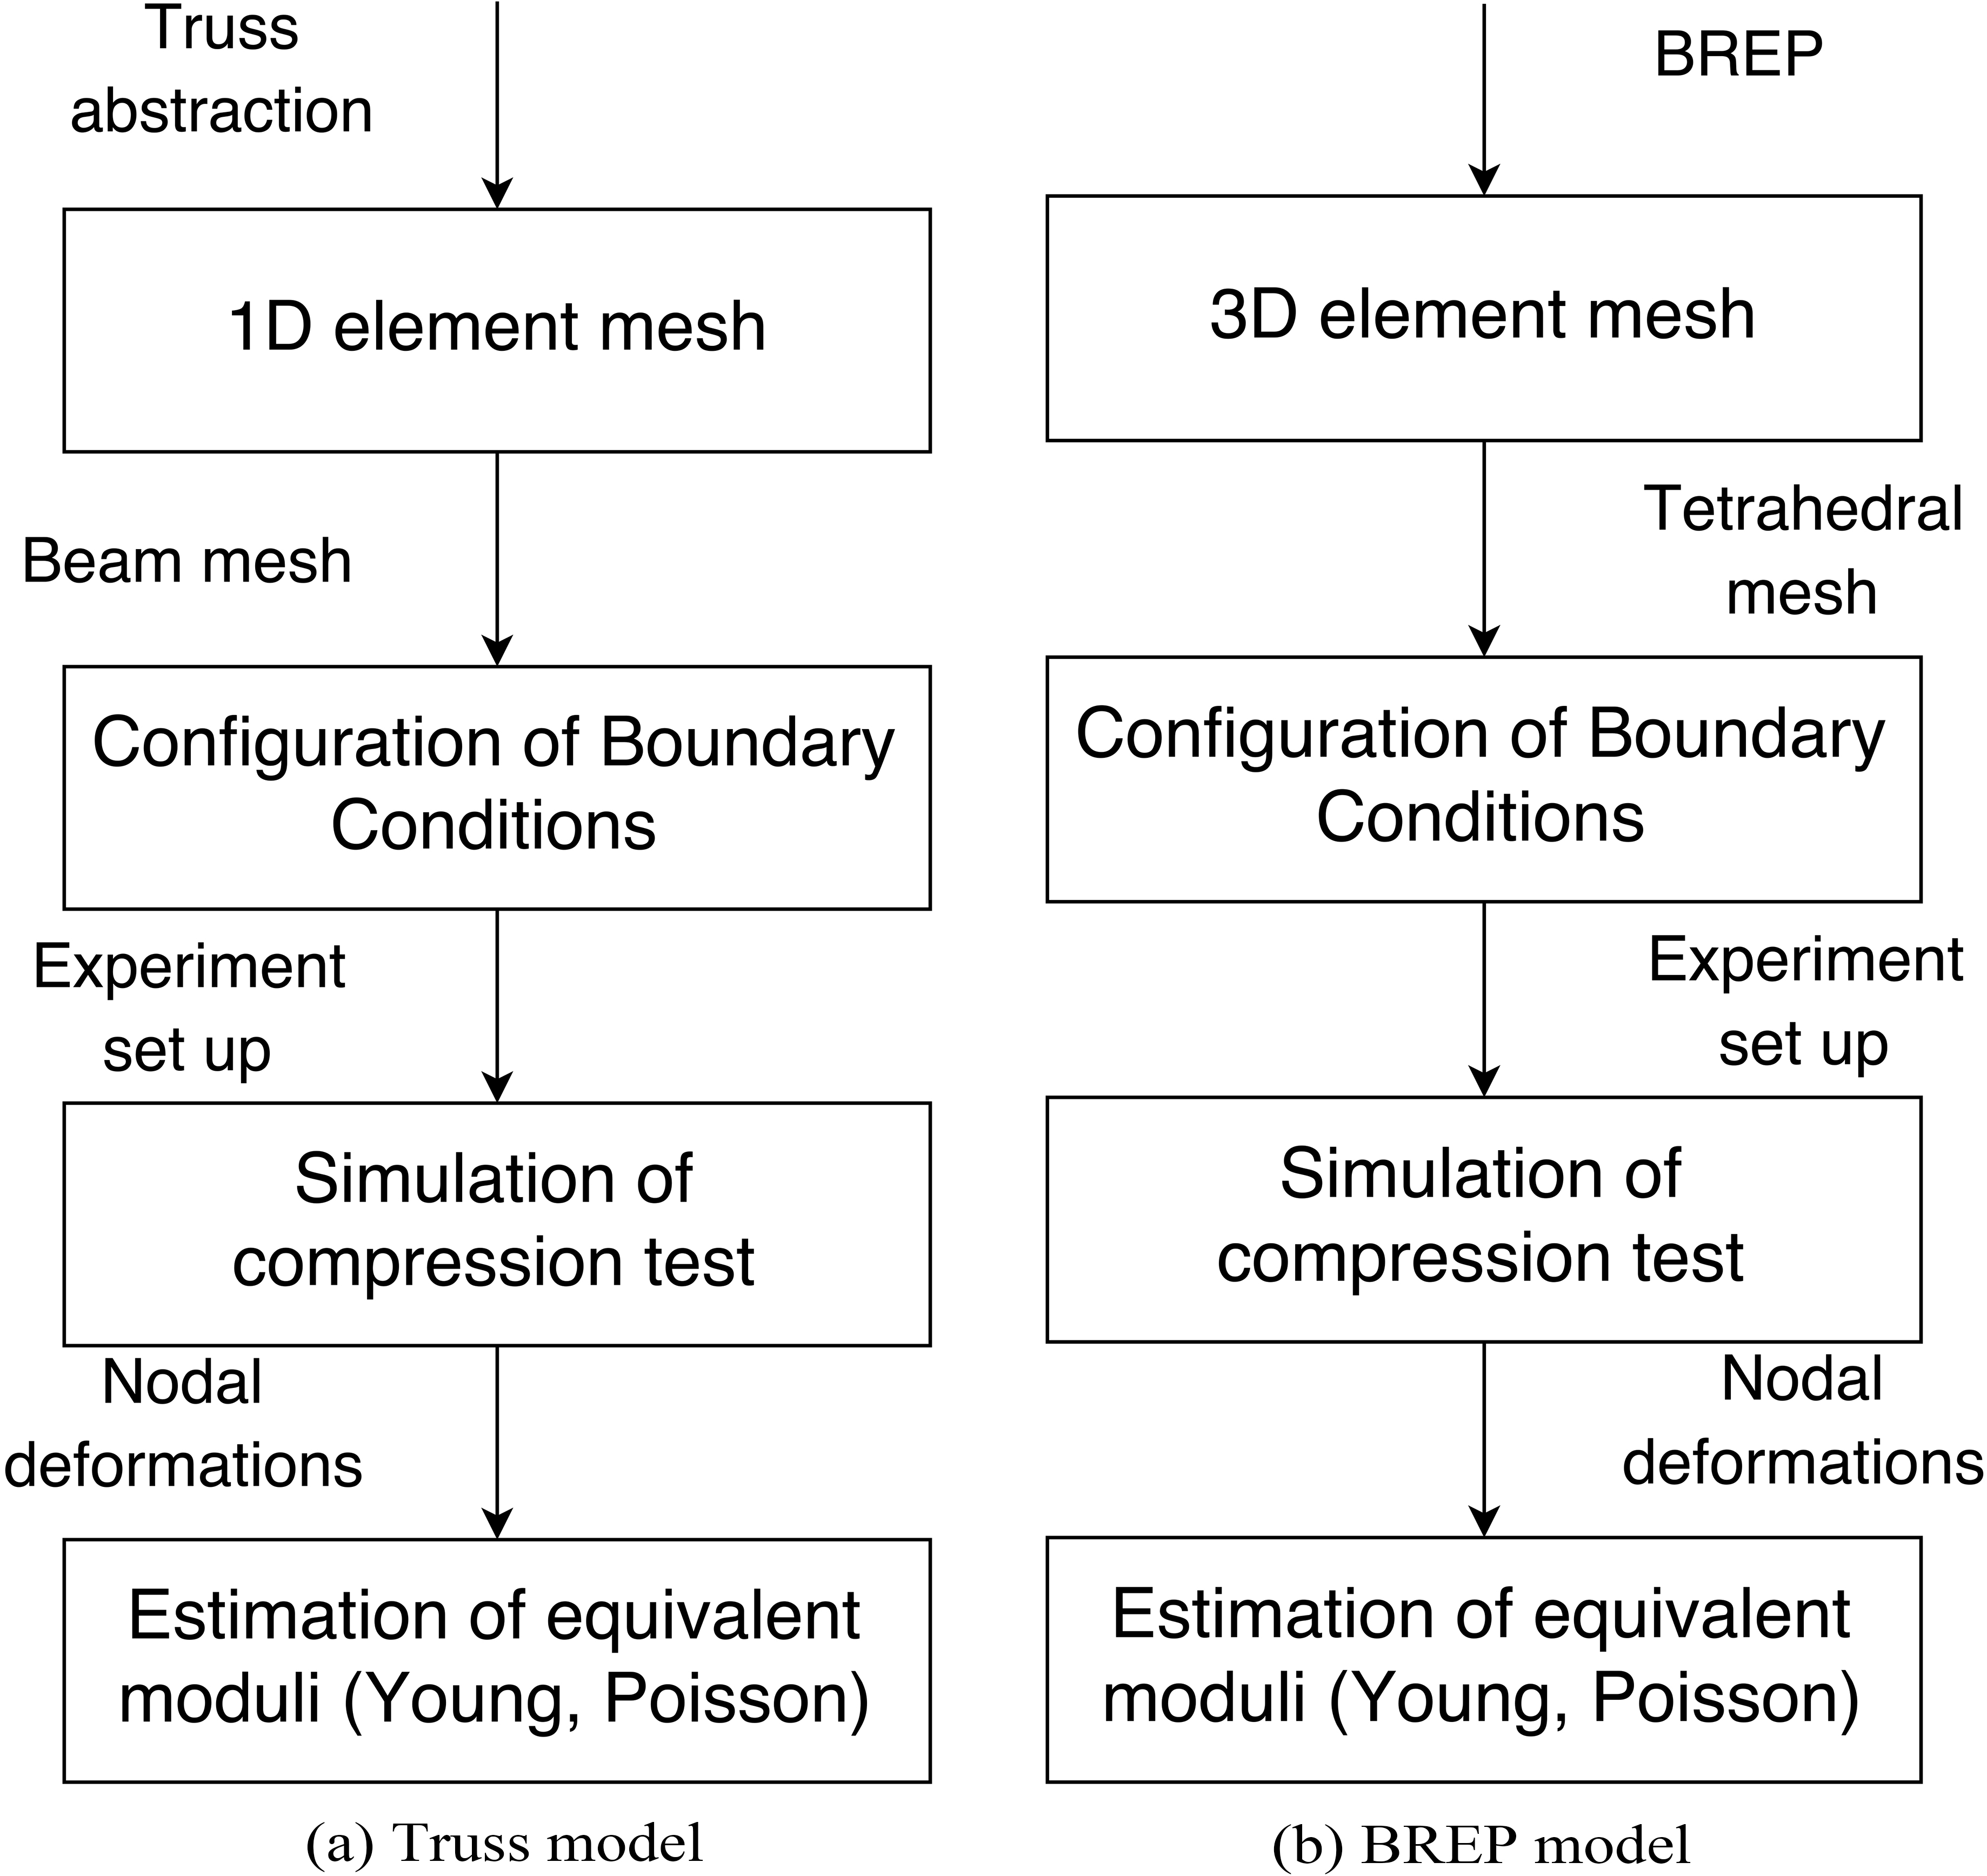 Comparison between procedures for the moduli estimation the Truss and BREP models.